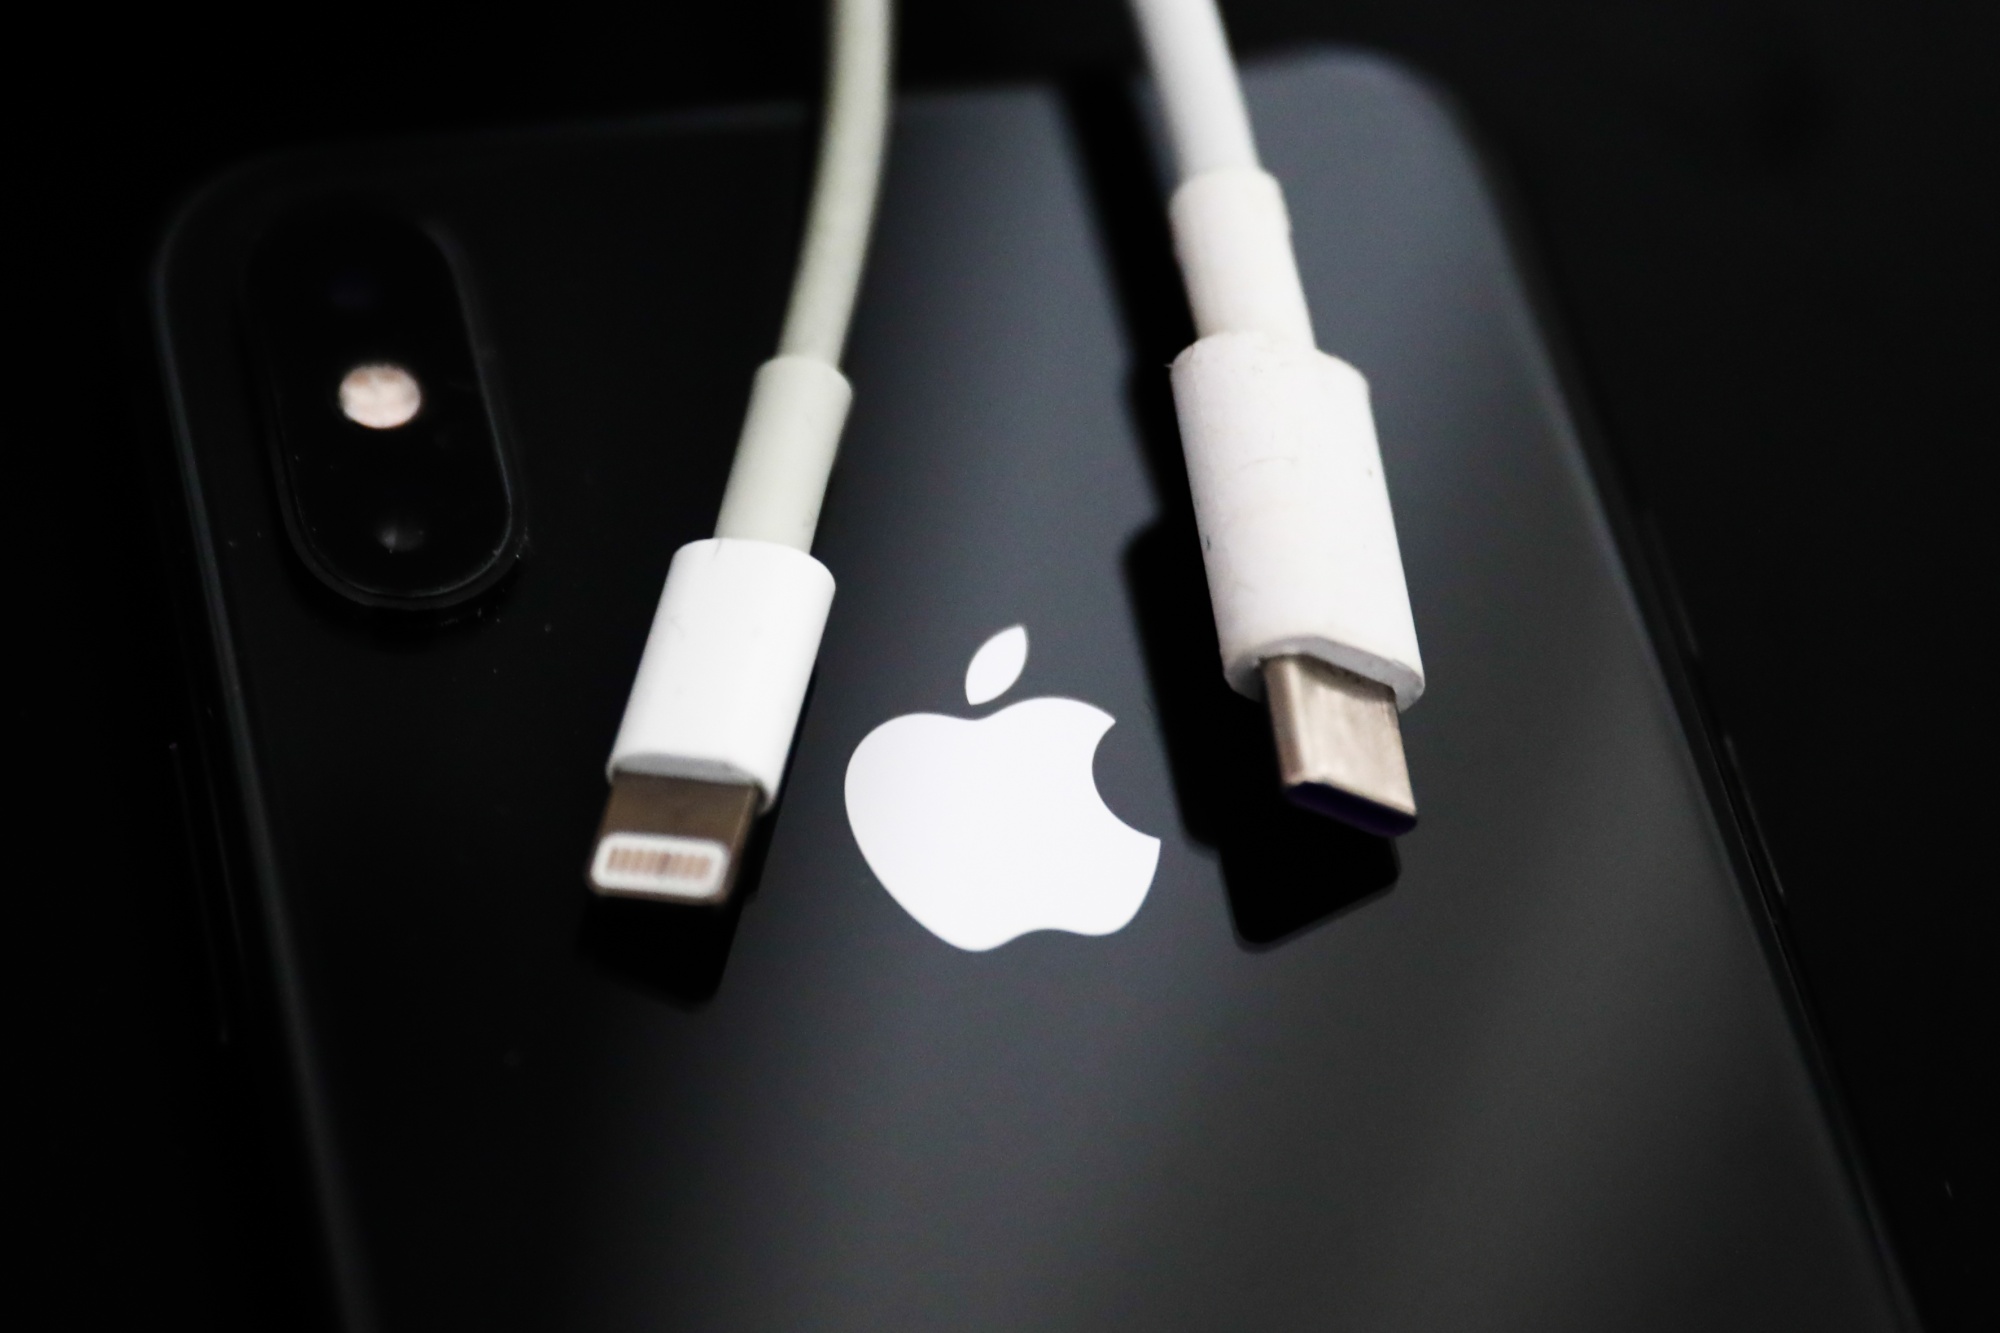 Apple Lightning and USB-C charging cables.